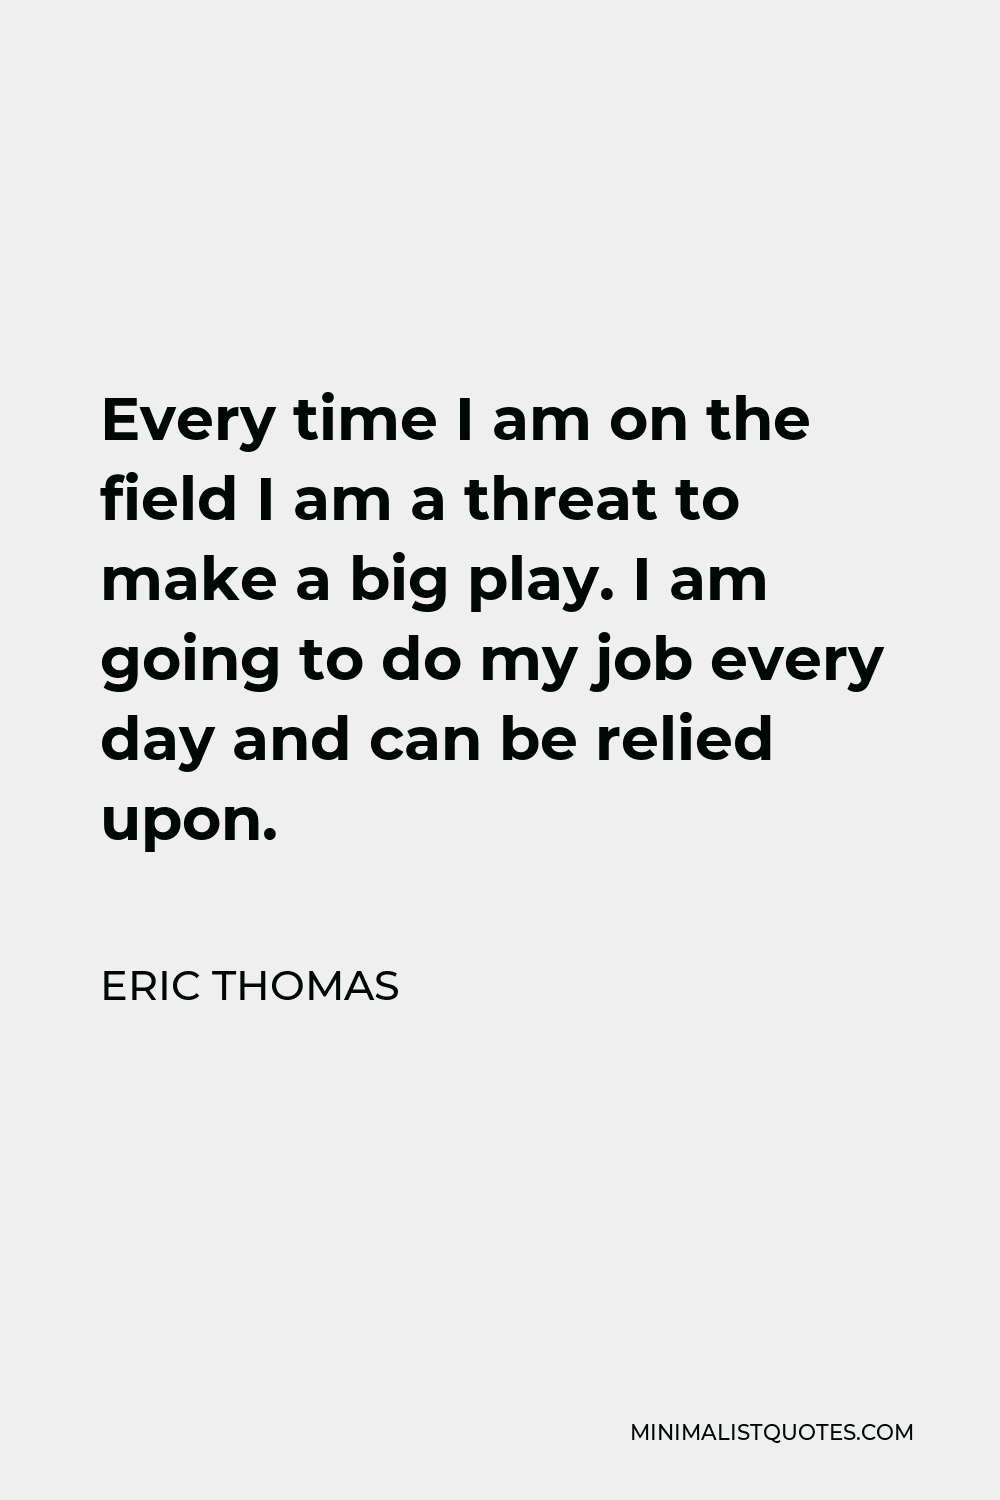 Eric Thomas Quote - Every time I am on the field I am a threat to make a big play. I am going to do my job every day and can be relied upon.